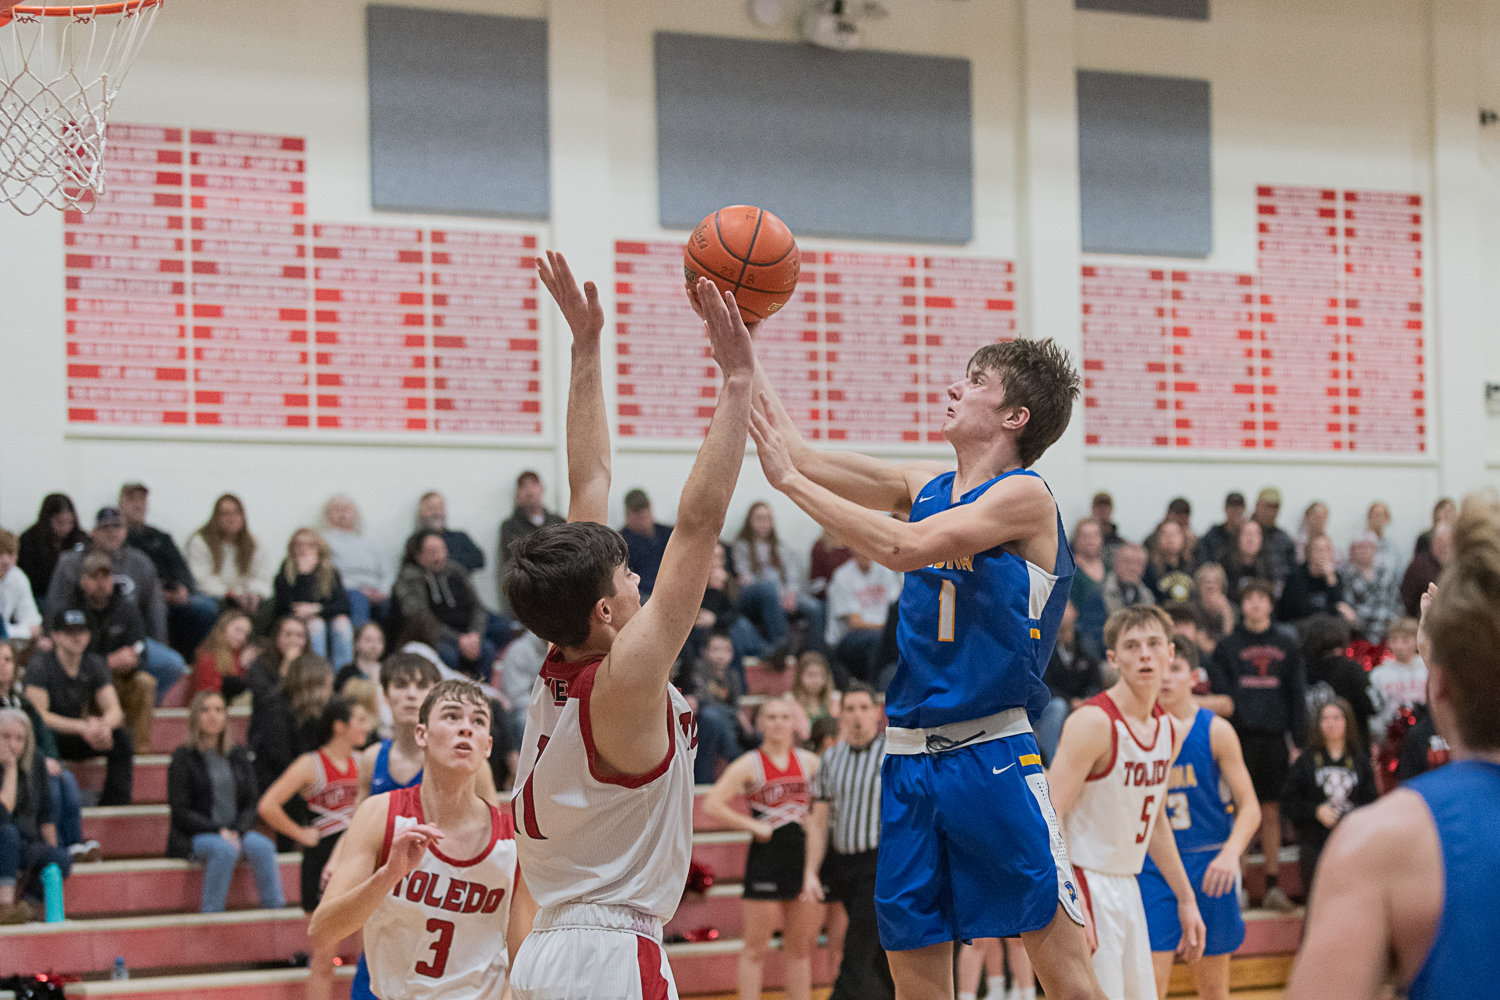 Seth Meister goes up in the lane during the second half of Adna's 52-51 loss at Toledo on Jan. 20.